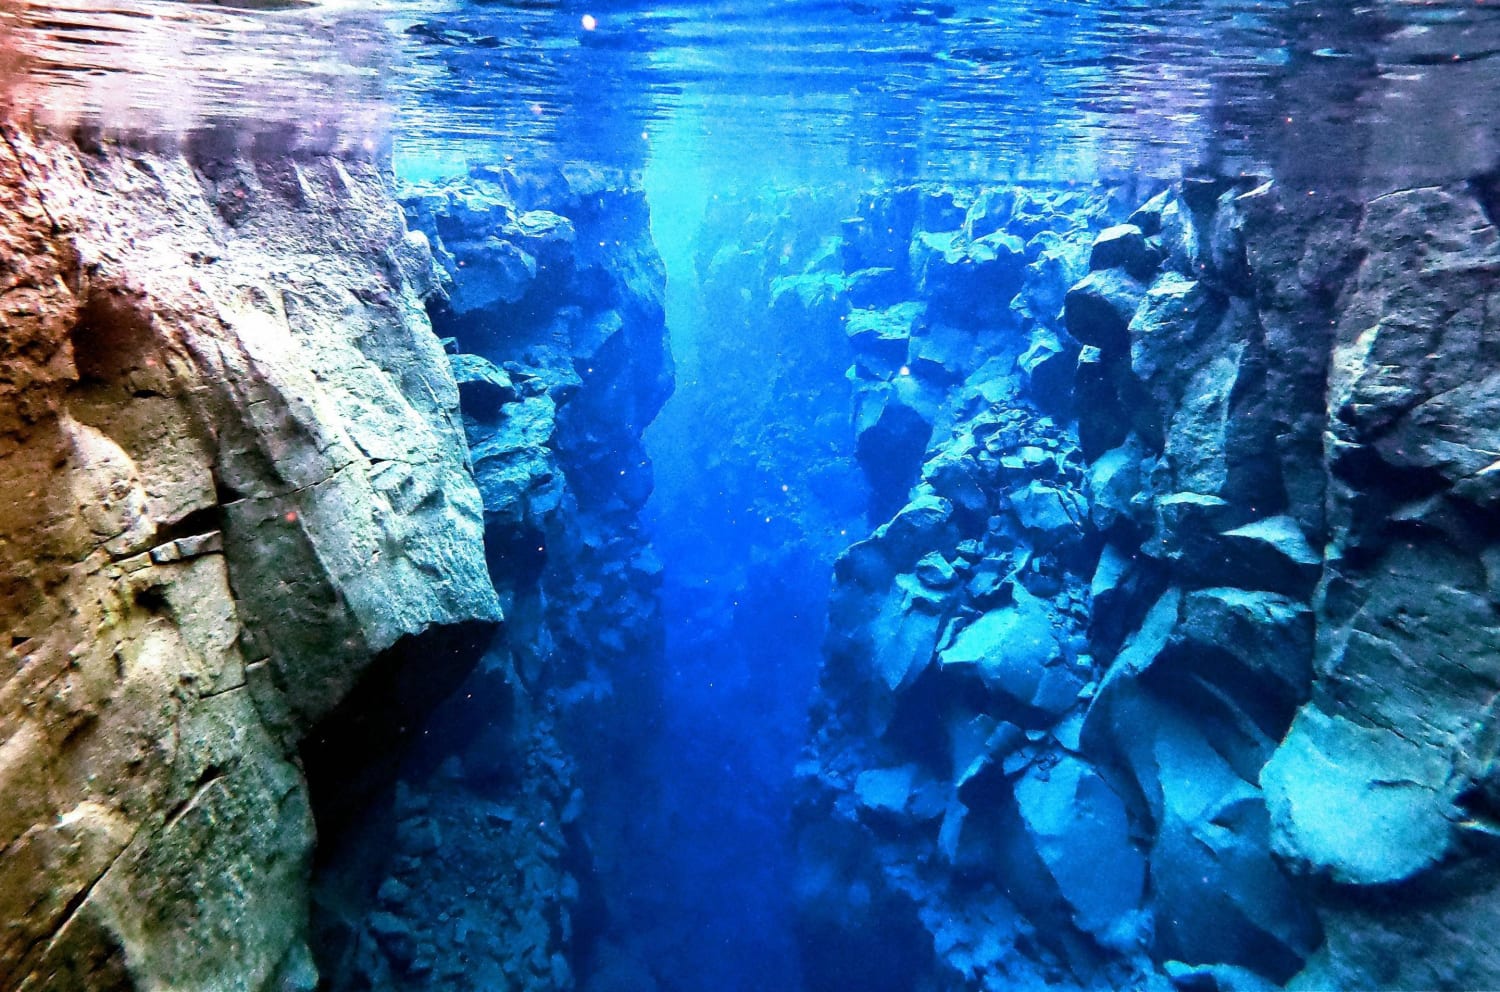 “The Silfra Rift” in Iceland sits between the North American and Eurasian tectonic plates. It has crystal clear water, and you can snorkel and dive between the two continents.